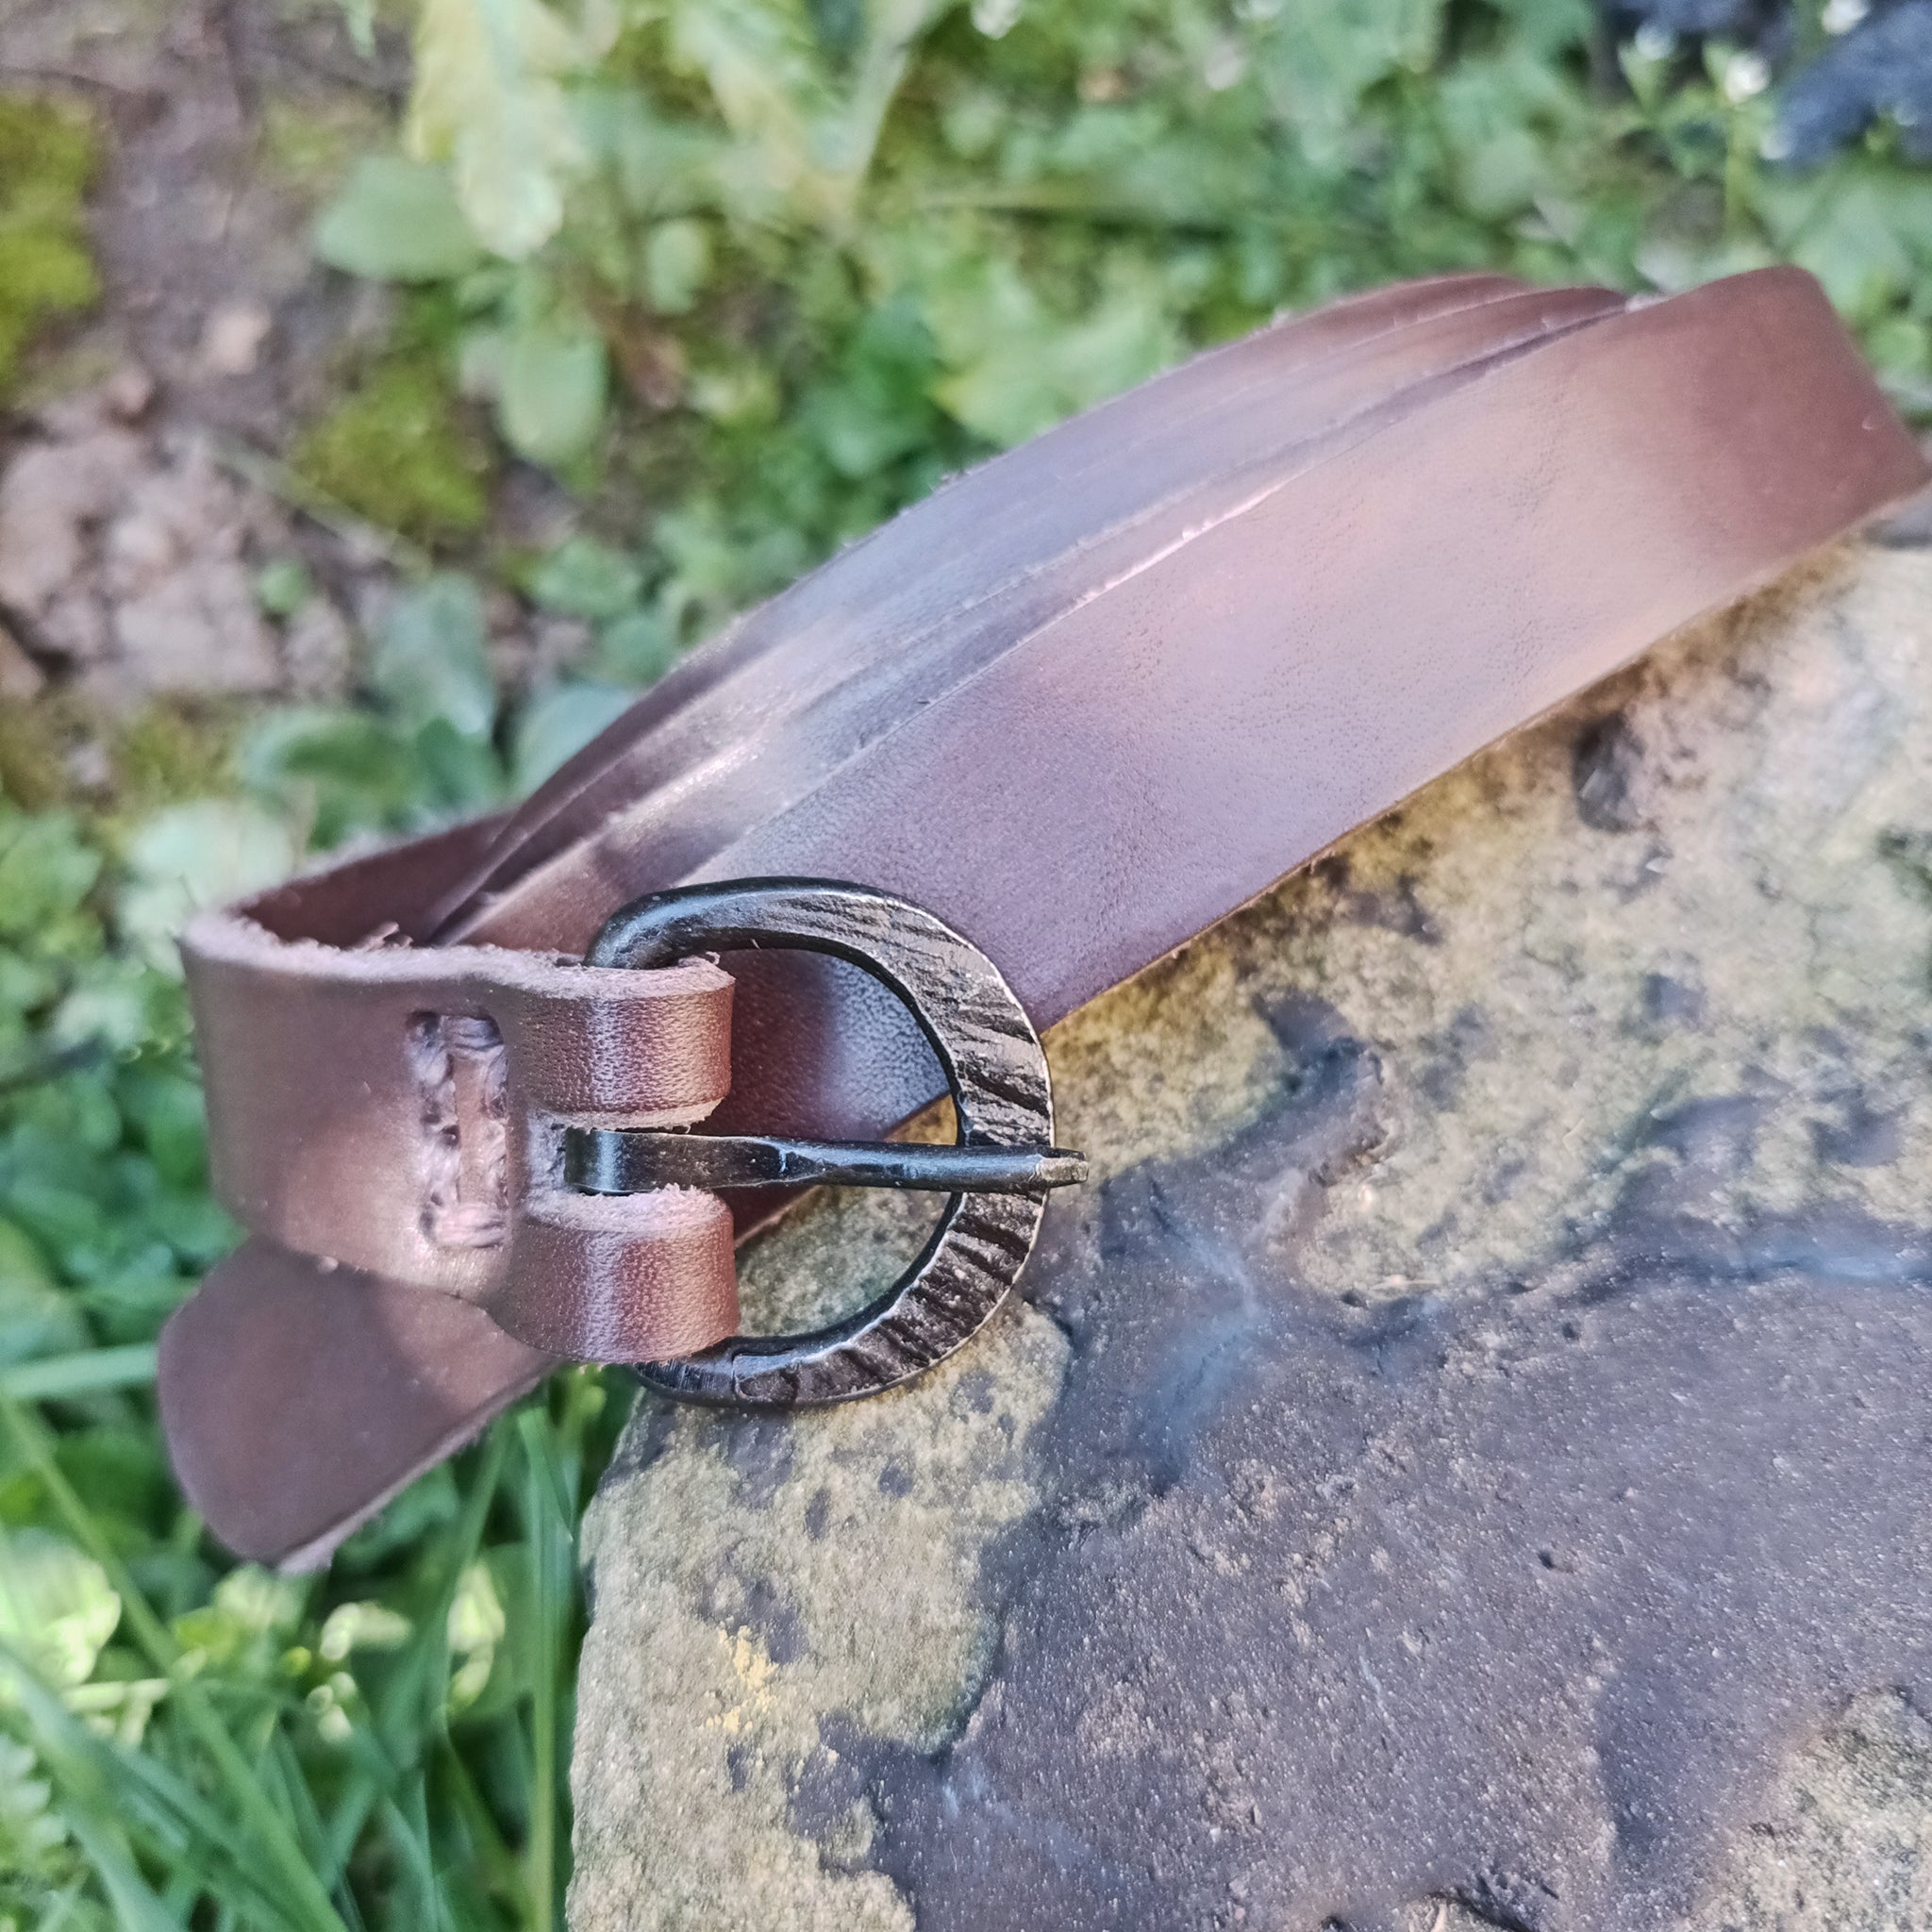 Hand-Forged Iron Viking / Medieval Buckle - 20mm (0.75 inch) on Brown Leather Belt - On Rock